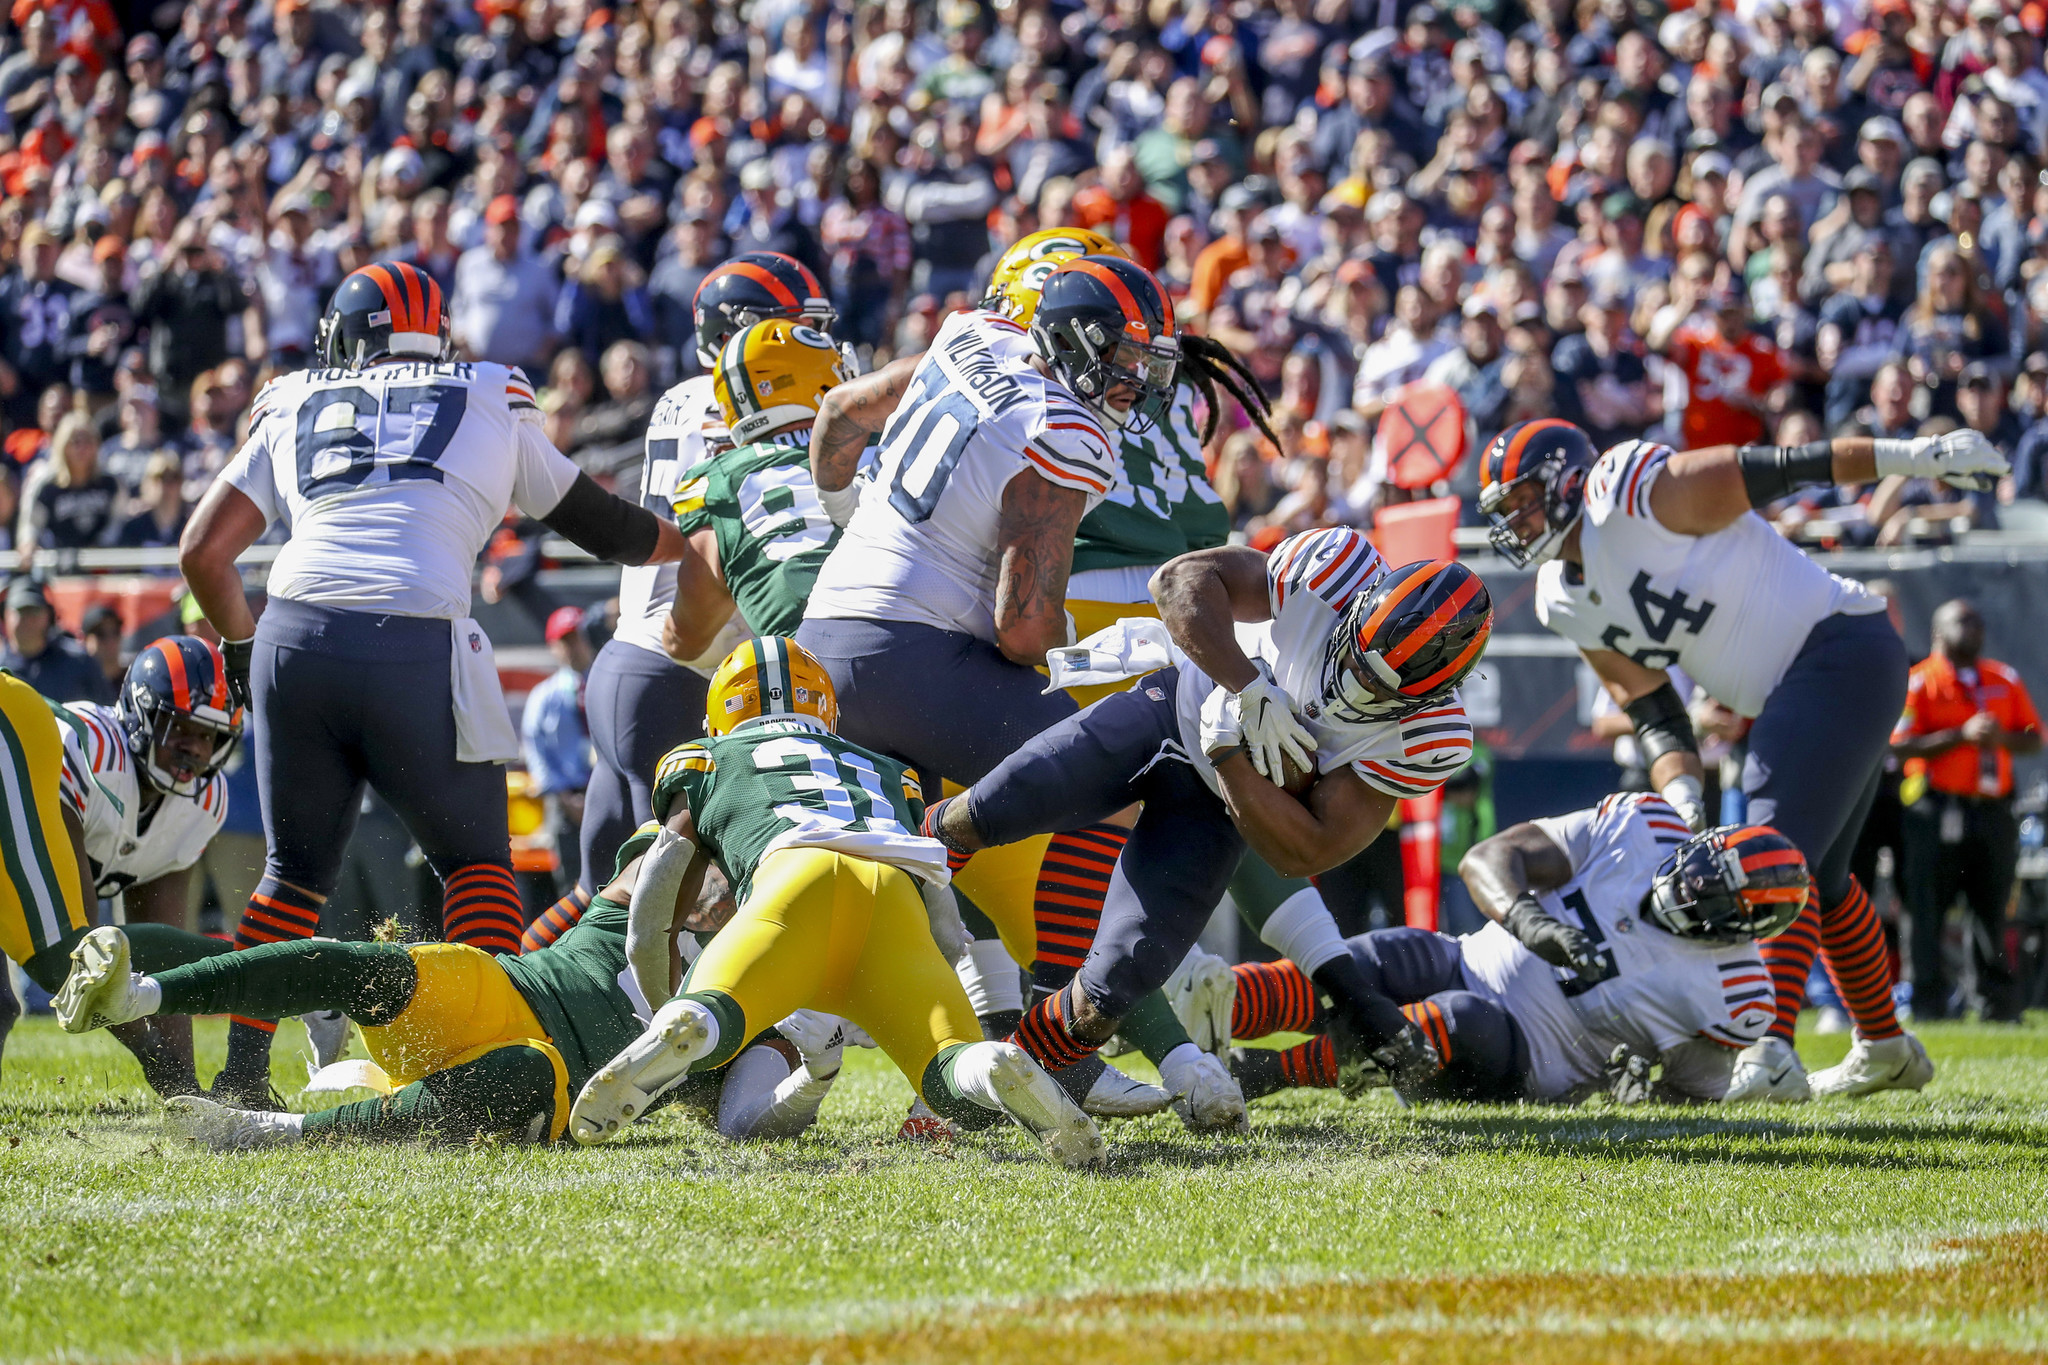 Rodgers Throws 2 TDs, Runs for 1 as Packers Beat Bears 24-14, Chicago News